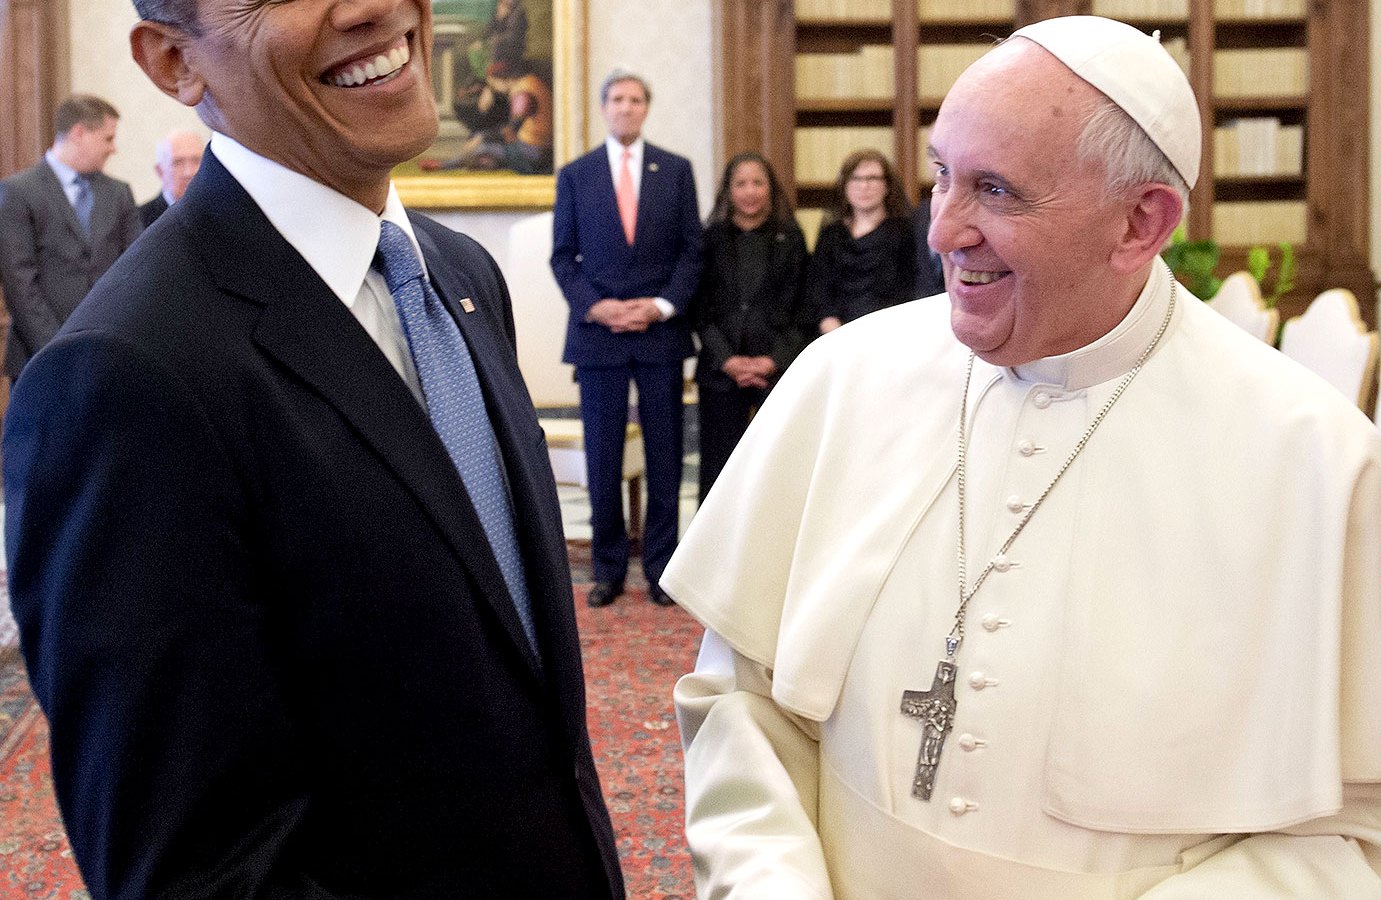 President Obama meets Pope Francis